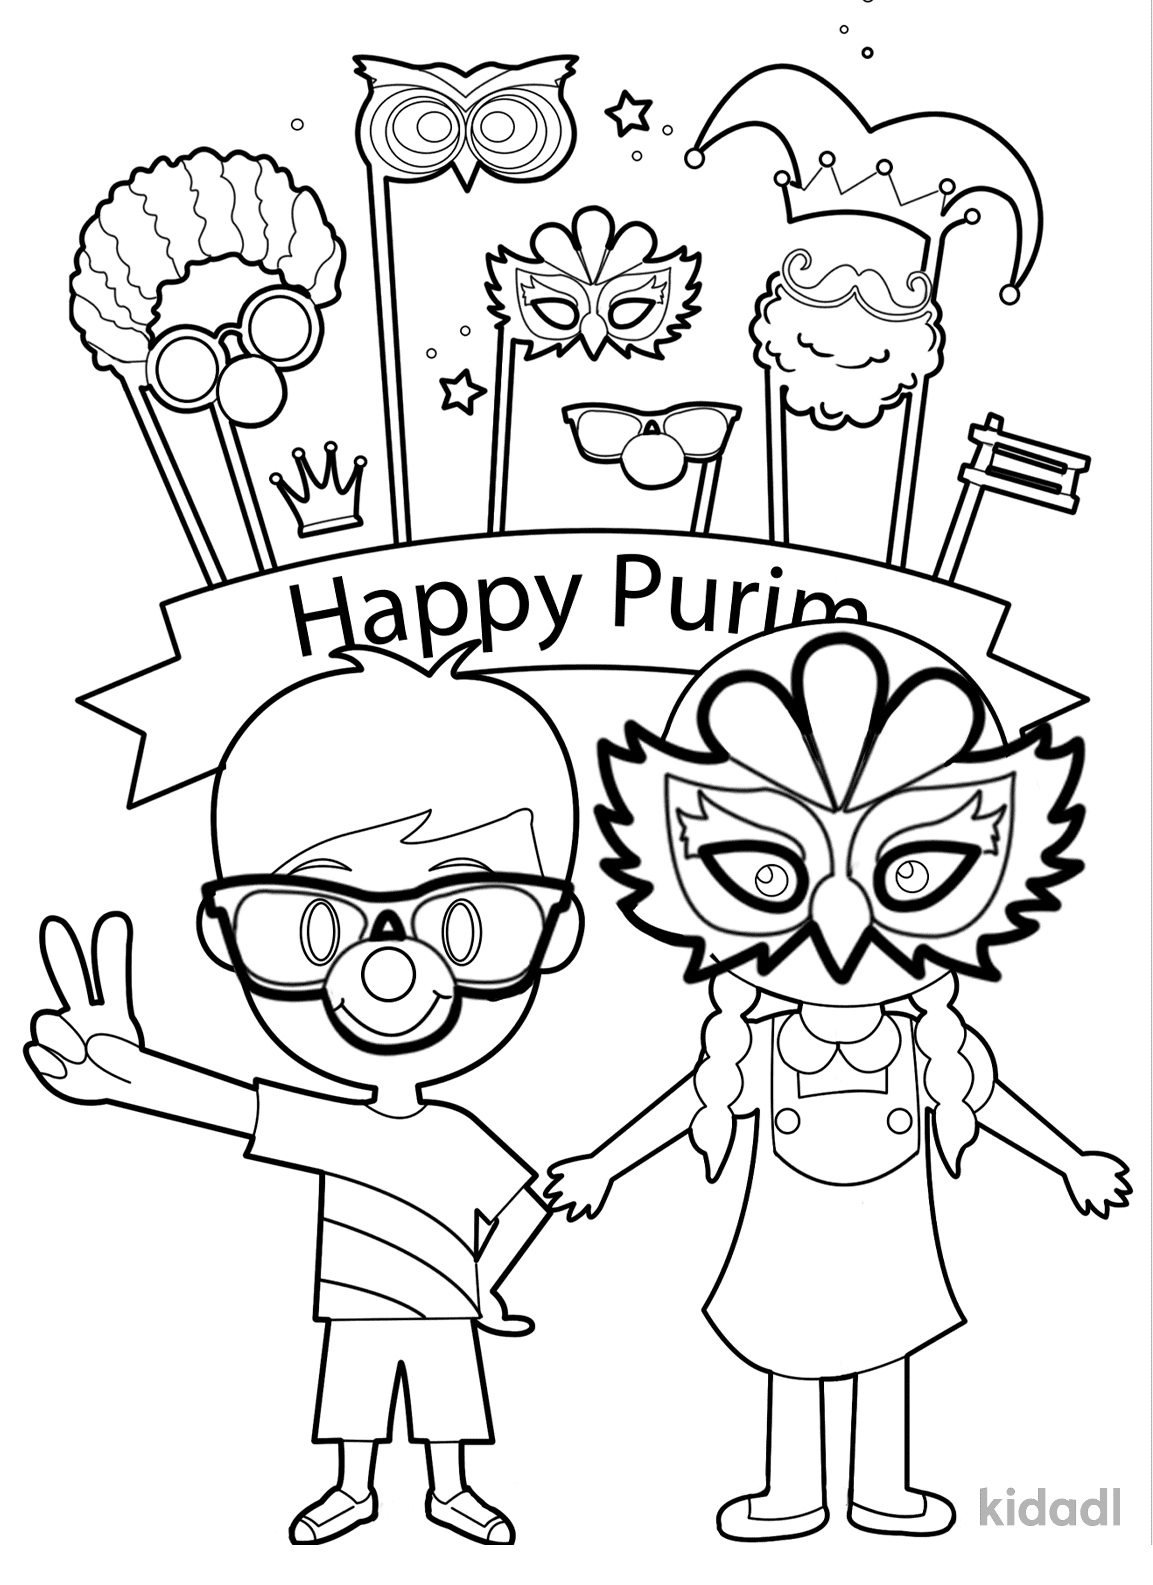 Happy Purim Kids Coloring Pages